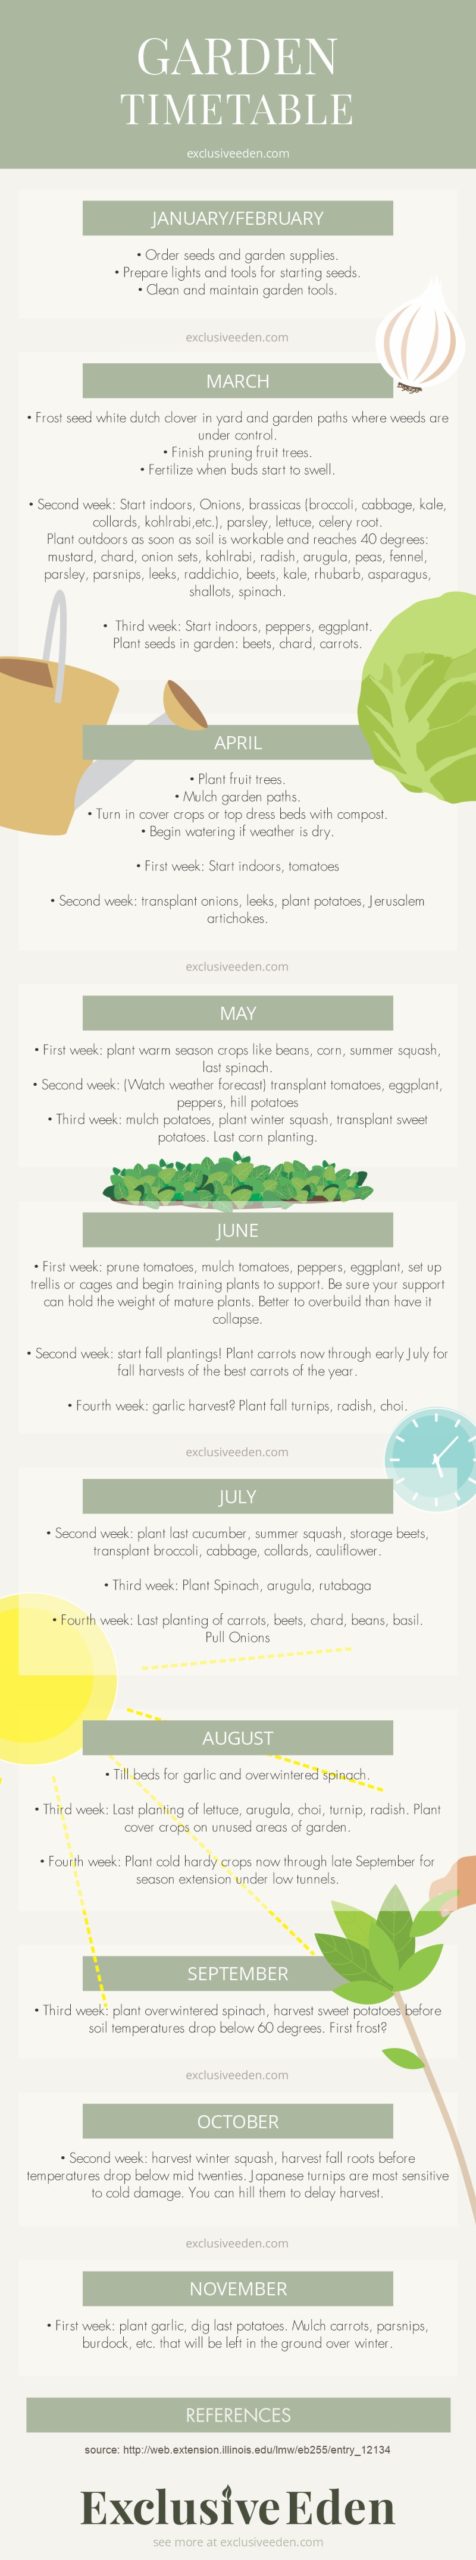 Garden timetable infographic illustrated infographic.